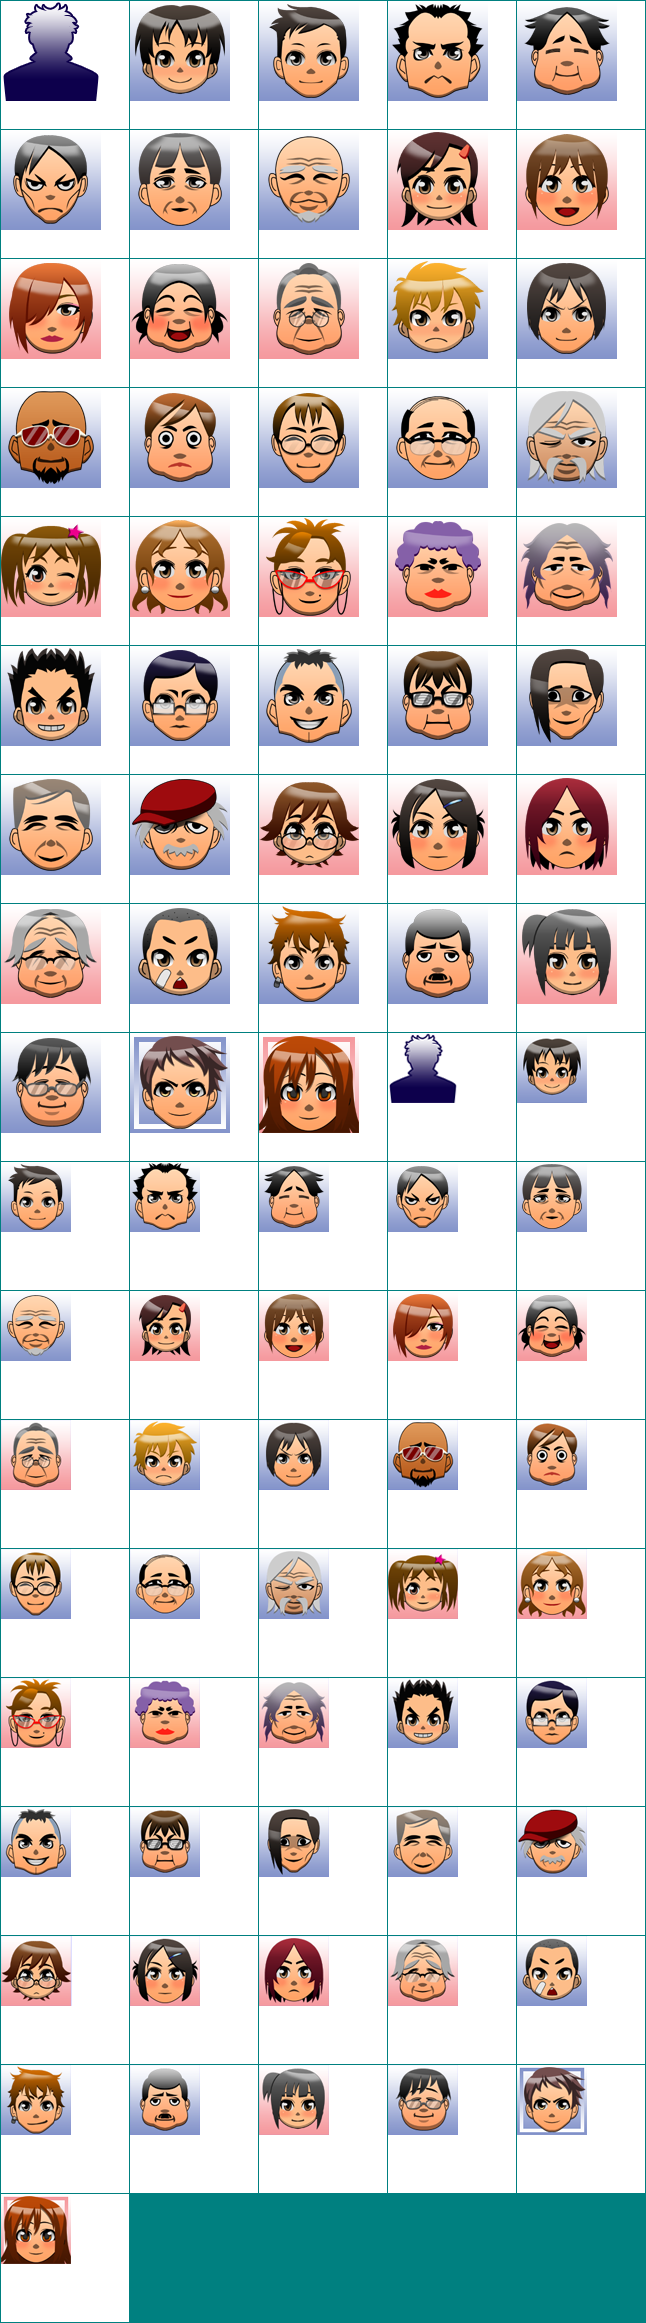 Simple 2000 Series Wii Vol. 1 - The Table Game - Avatars